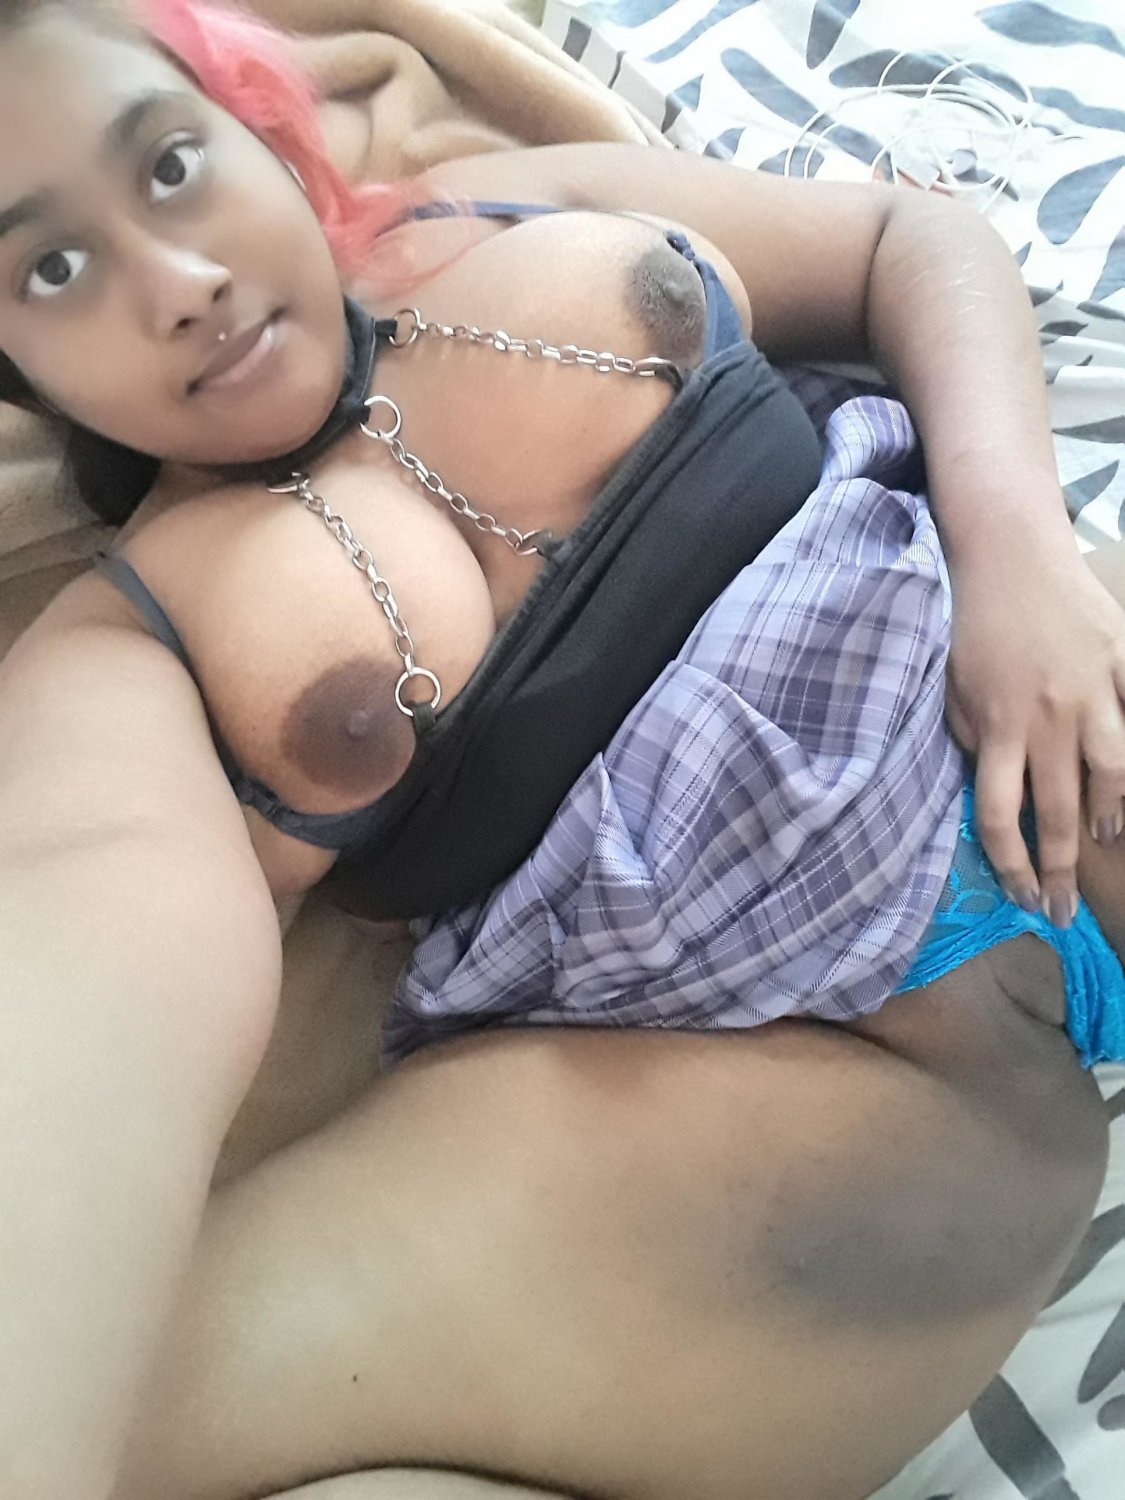 Bbw Plumper Indian - Chubby Indian Thot - Porn Videos & Photos - EroMe